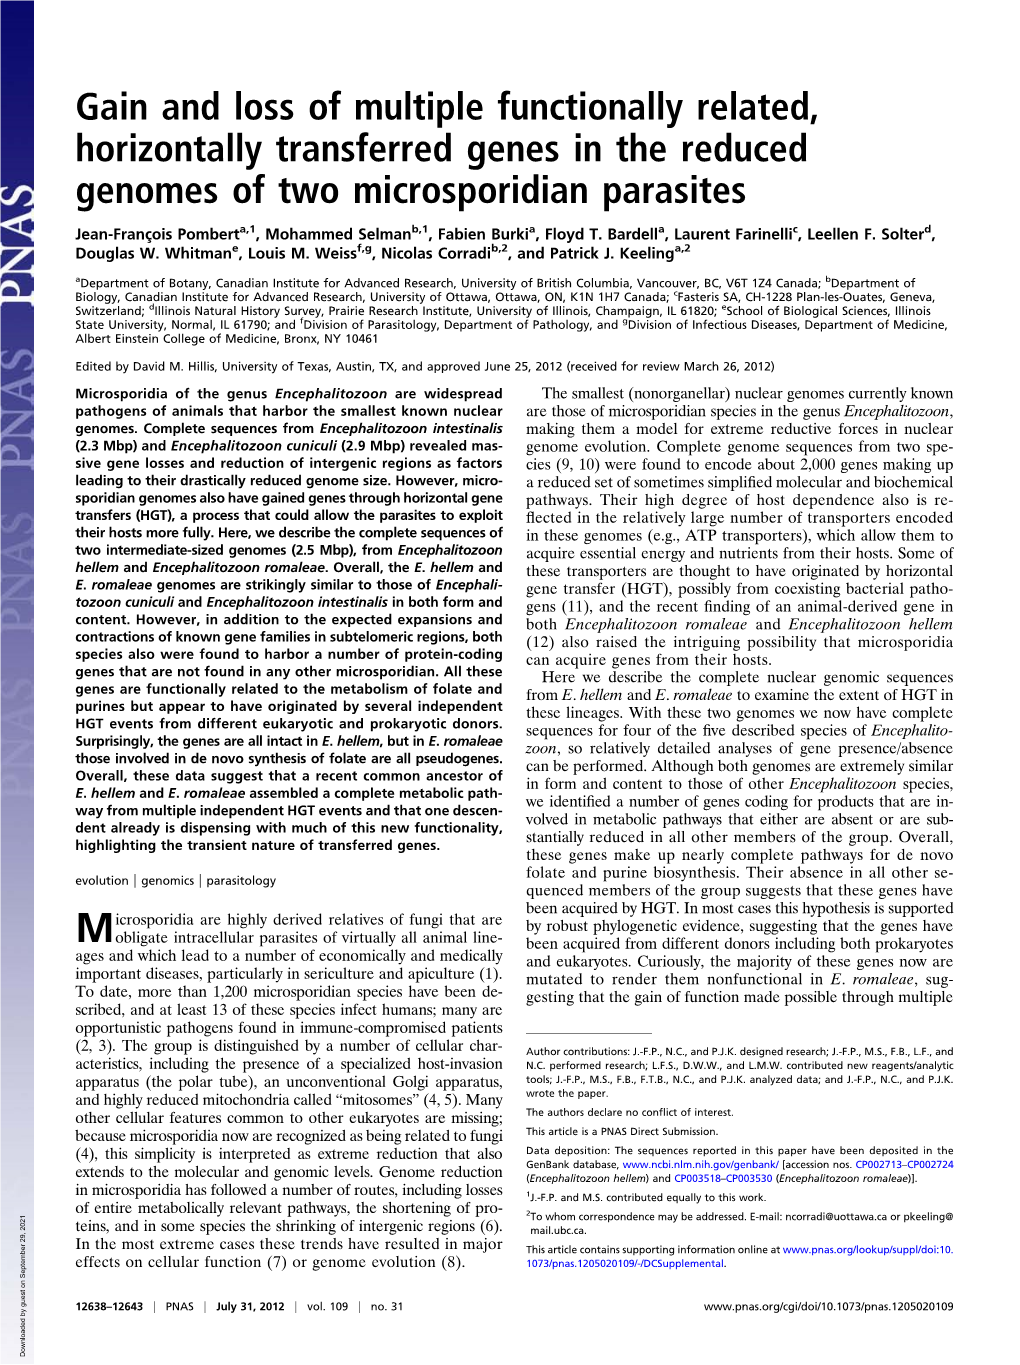 Gain and Loss of Multiple Functionally Related, Horizontally Transferred Genes in the Reduced Genomes of Two Microsporidian Parasites